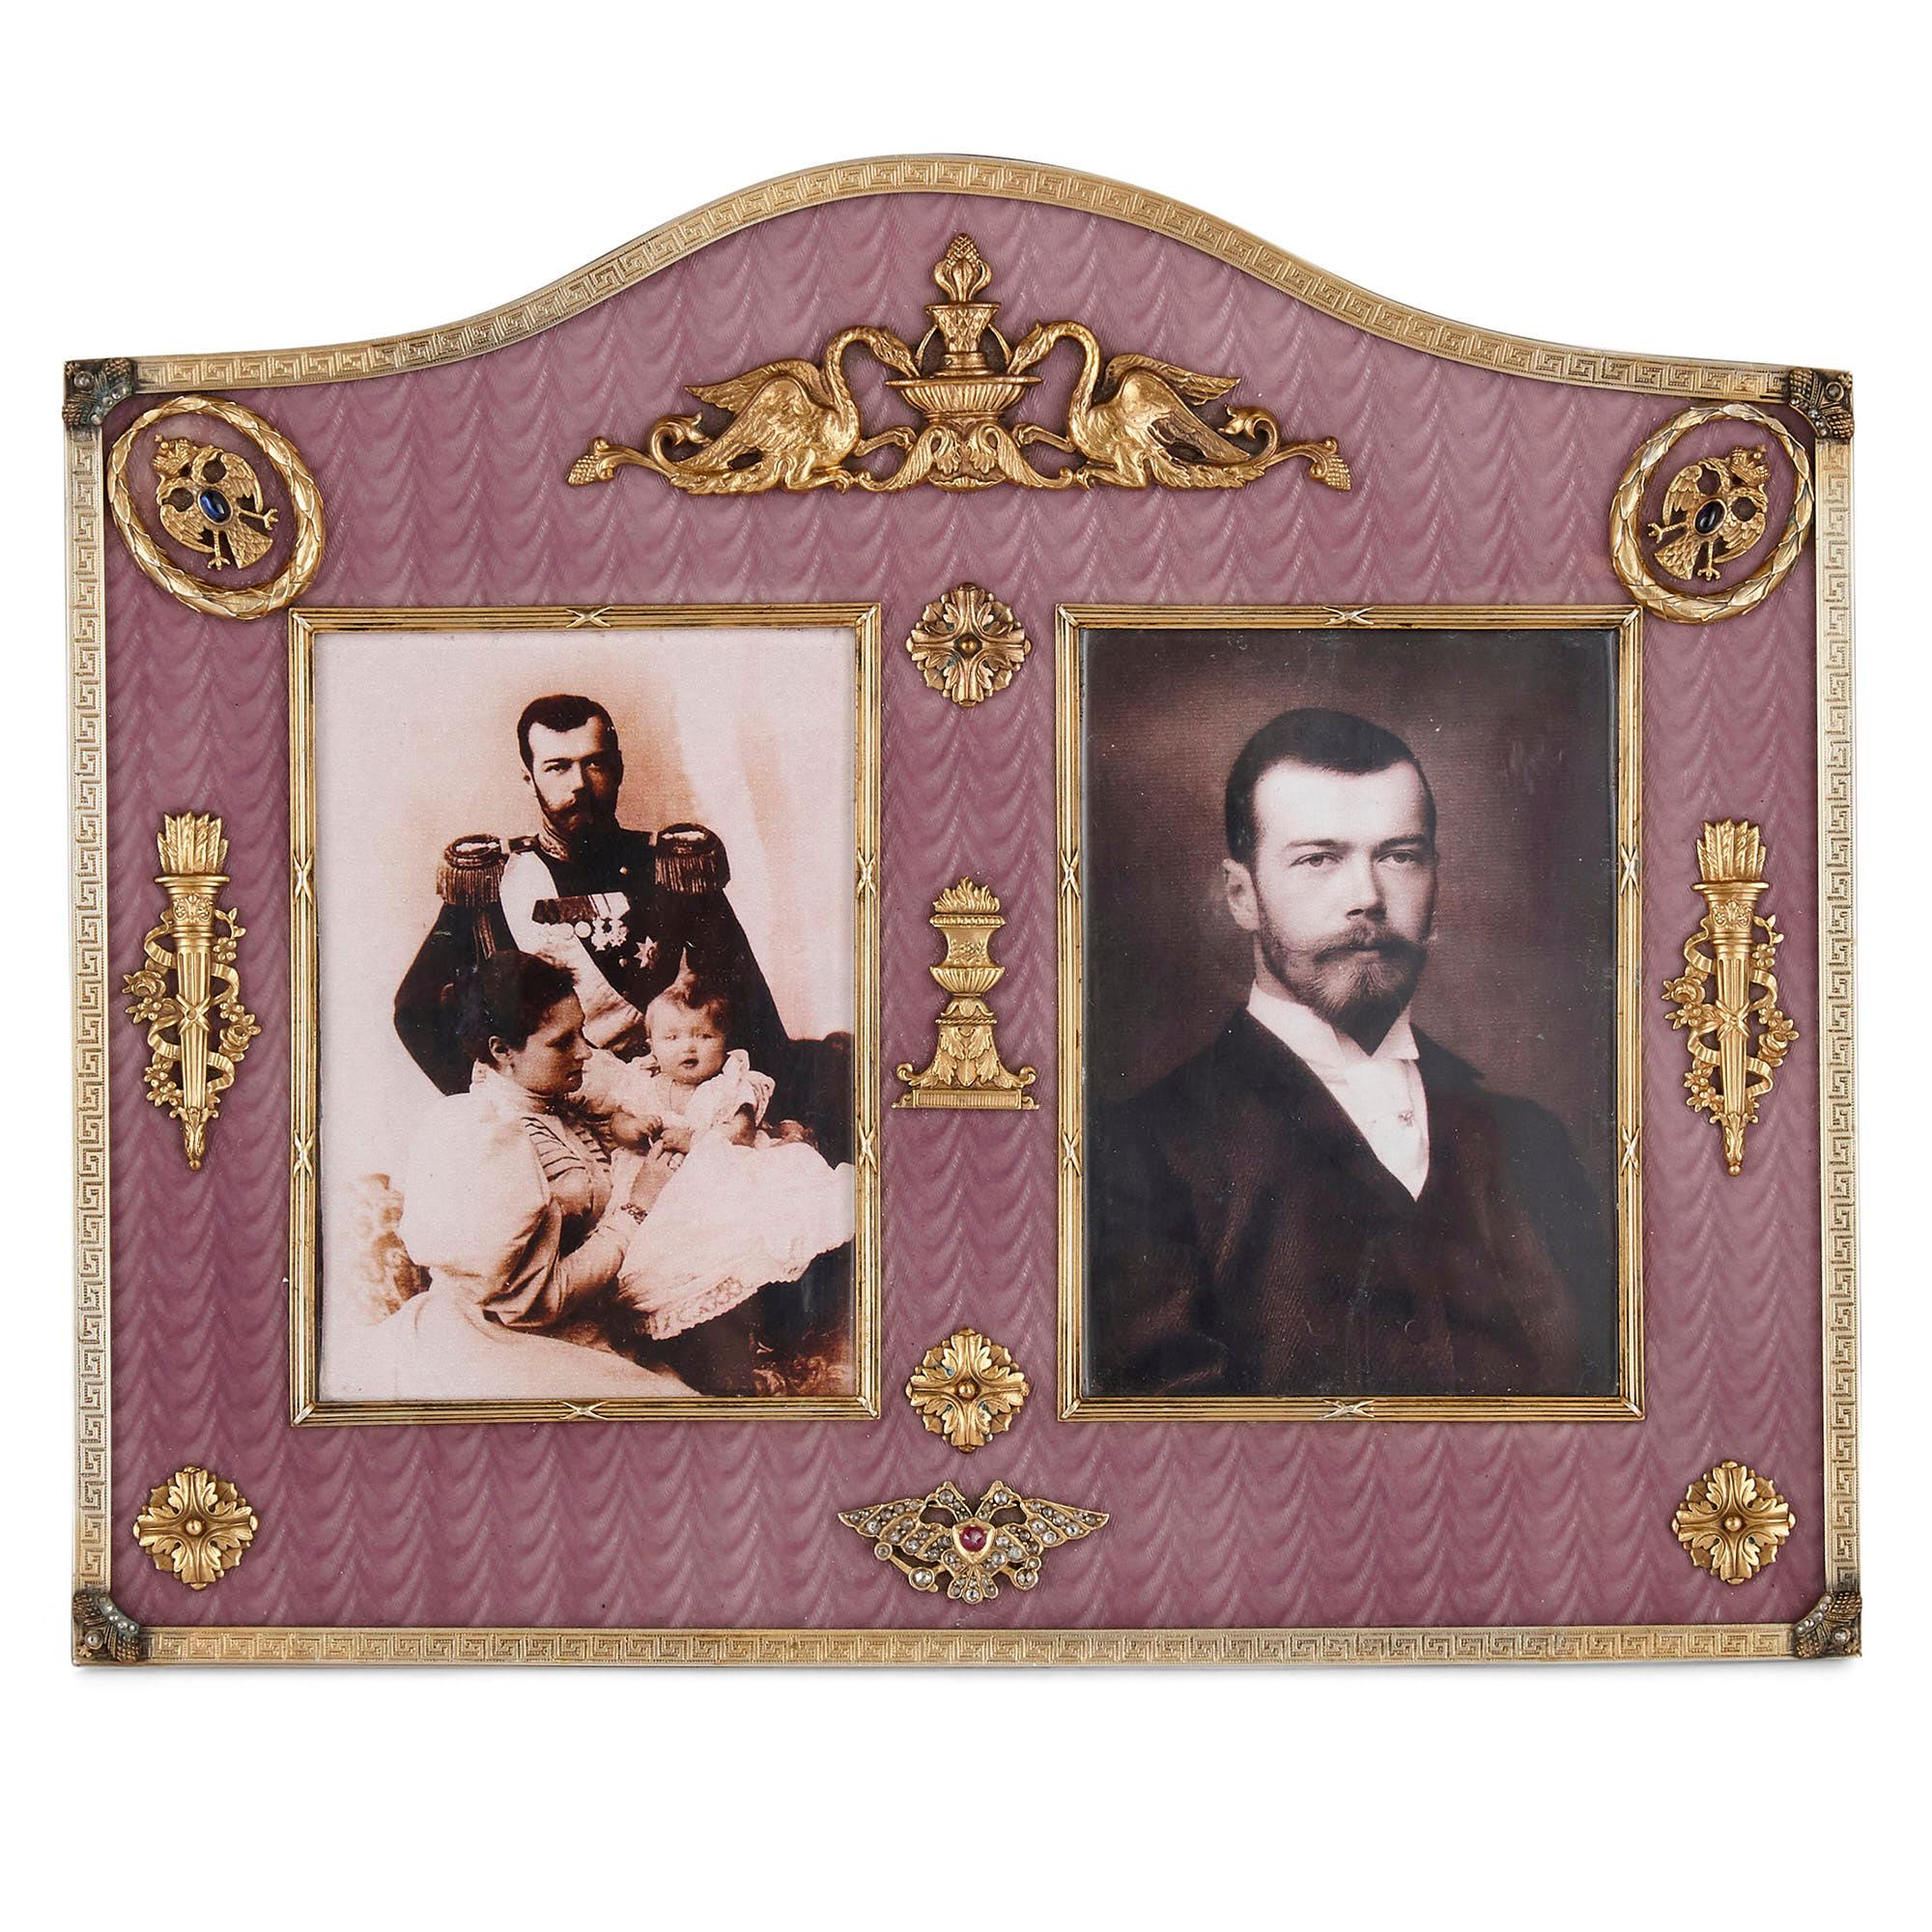 This double picture frame is designed in the style of Fabergé. The frame is rectangular in profile with a central protruding round crown. The surface of the frame is profusely ornamented with guilloché enamel in luxurious purple, the interior and